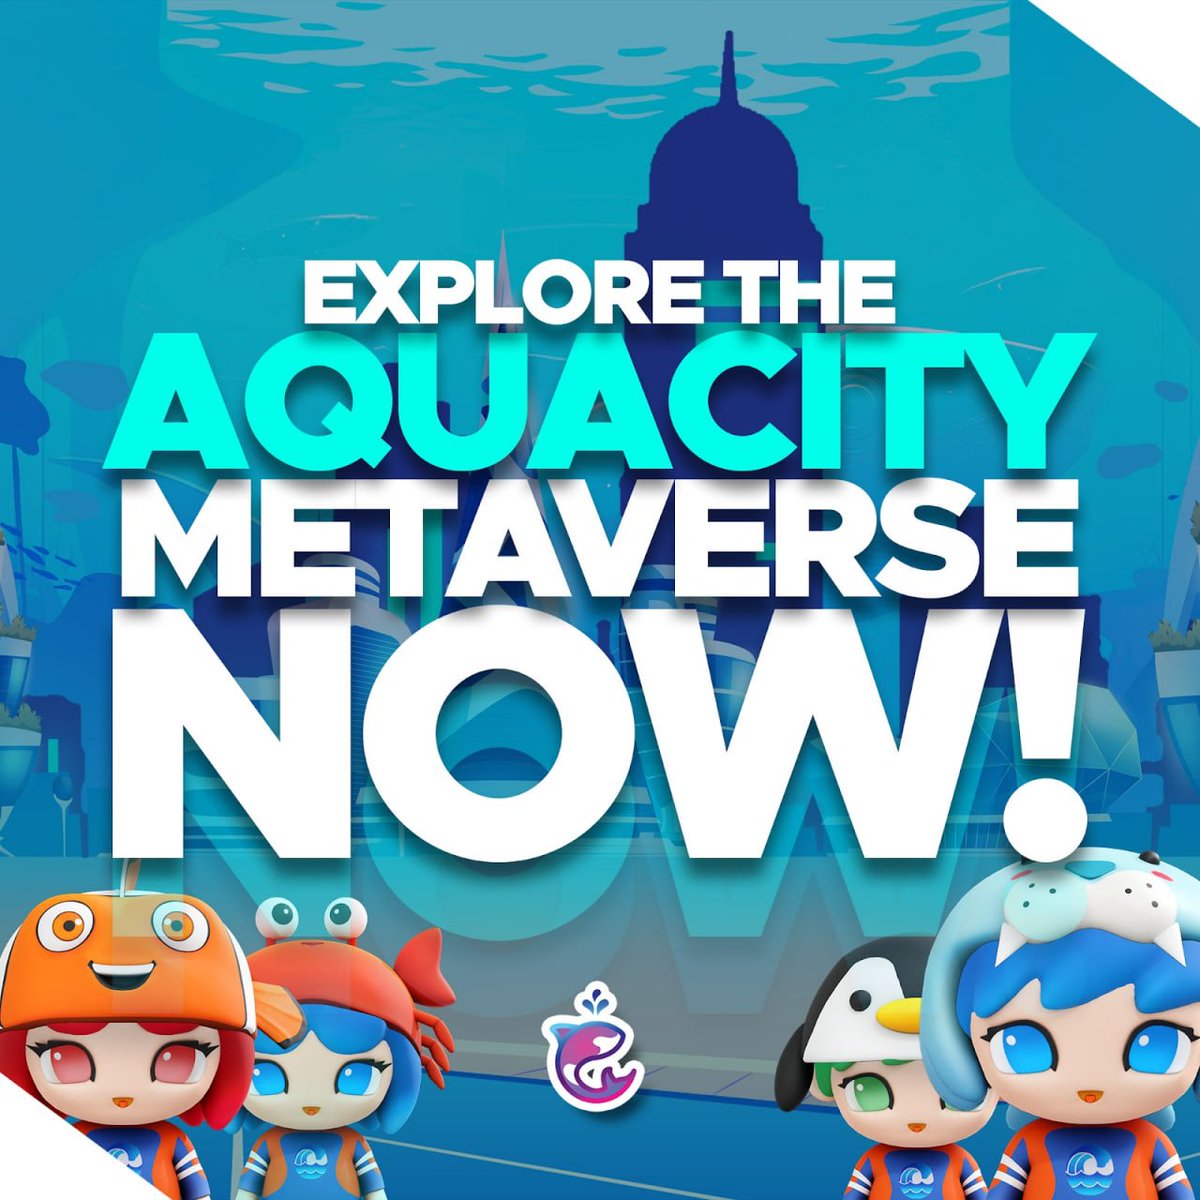 🌊 Hey there, Aquarians! 🐠 Haven't explored the #Aquacity #Metaverse yet? Or maybe it's been a while since your last dive? From hidden treasures to thrilling adventures, there's something for everyone in our aquatic realm. Join us >> aquacity.io 💫